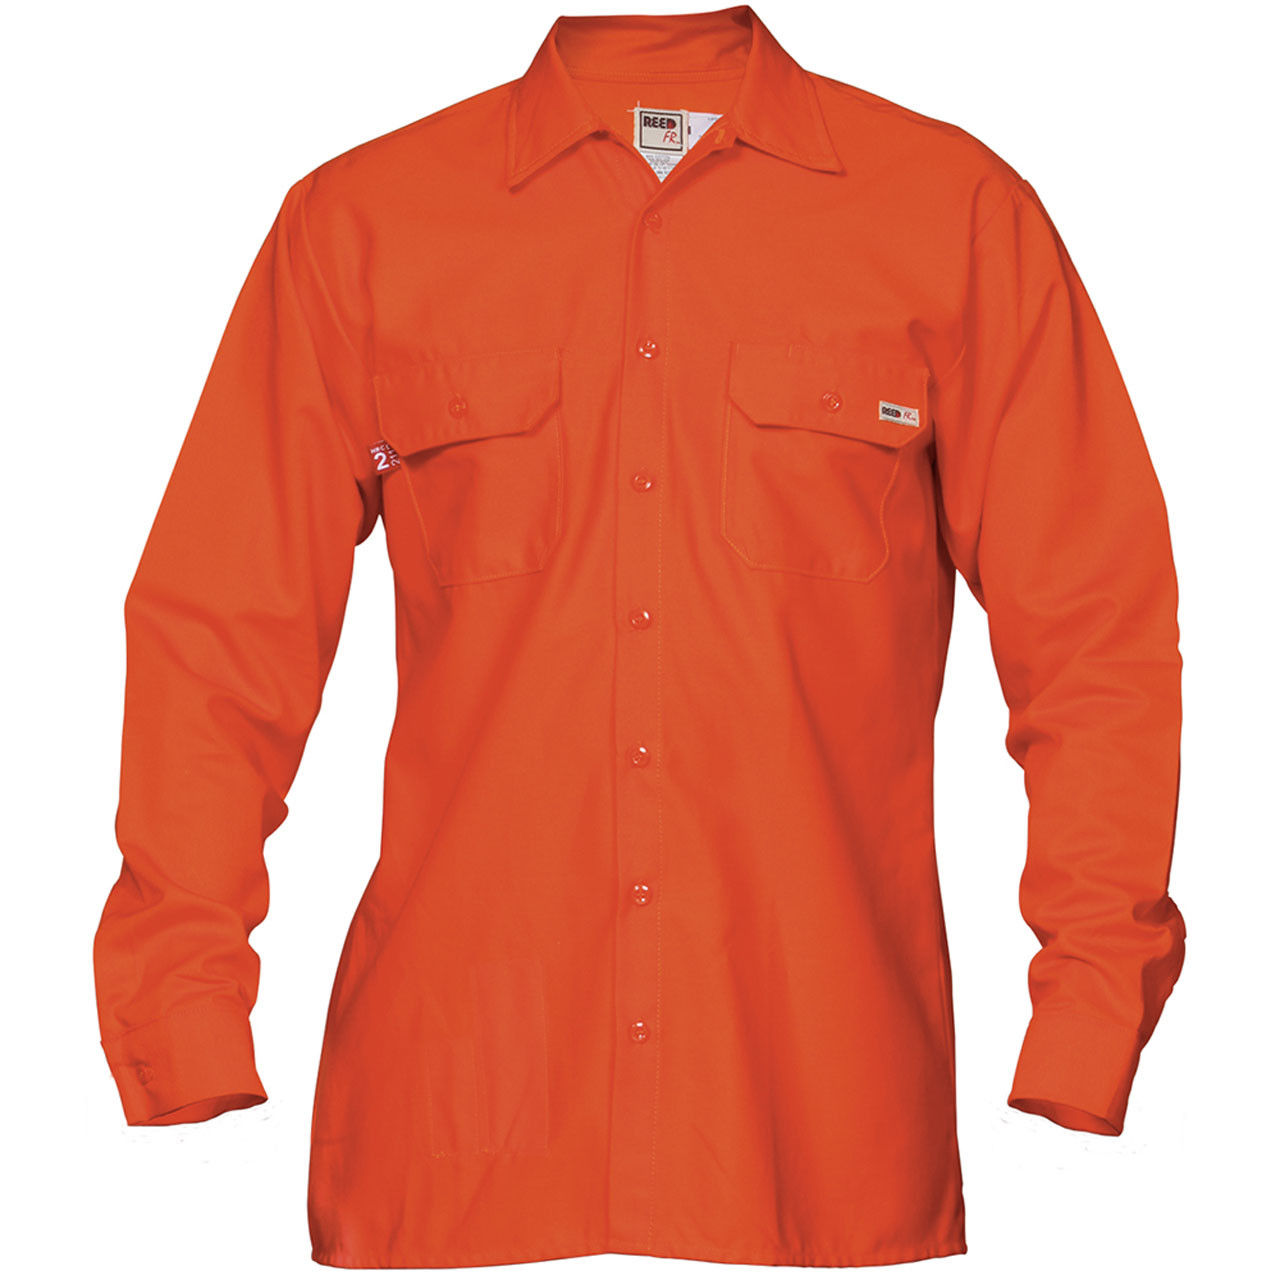 What is the flame resistance rating of these work shirts?